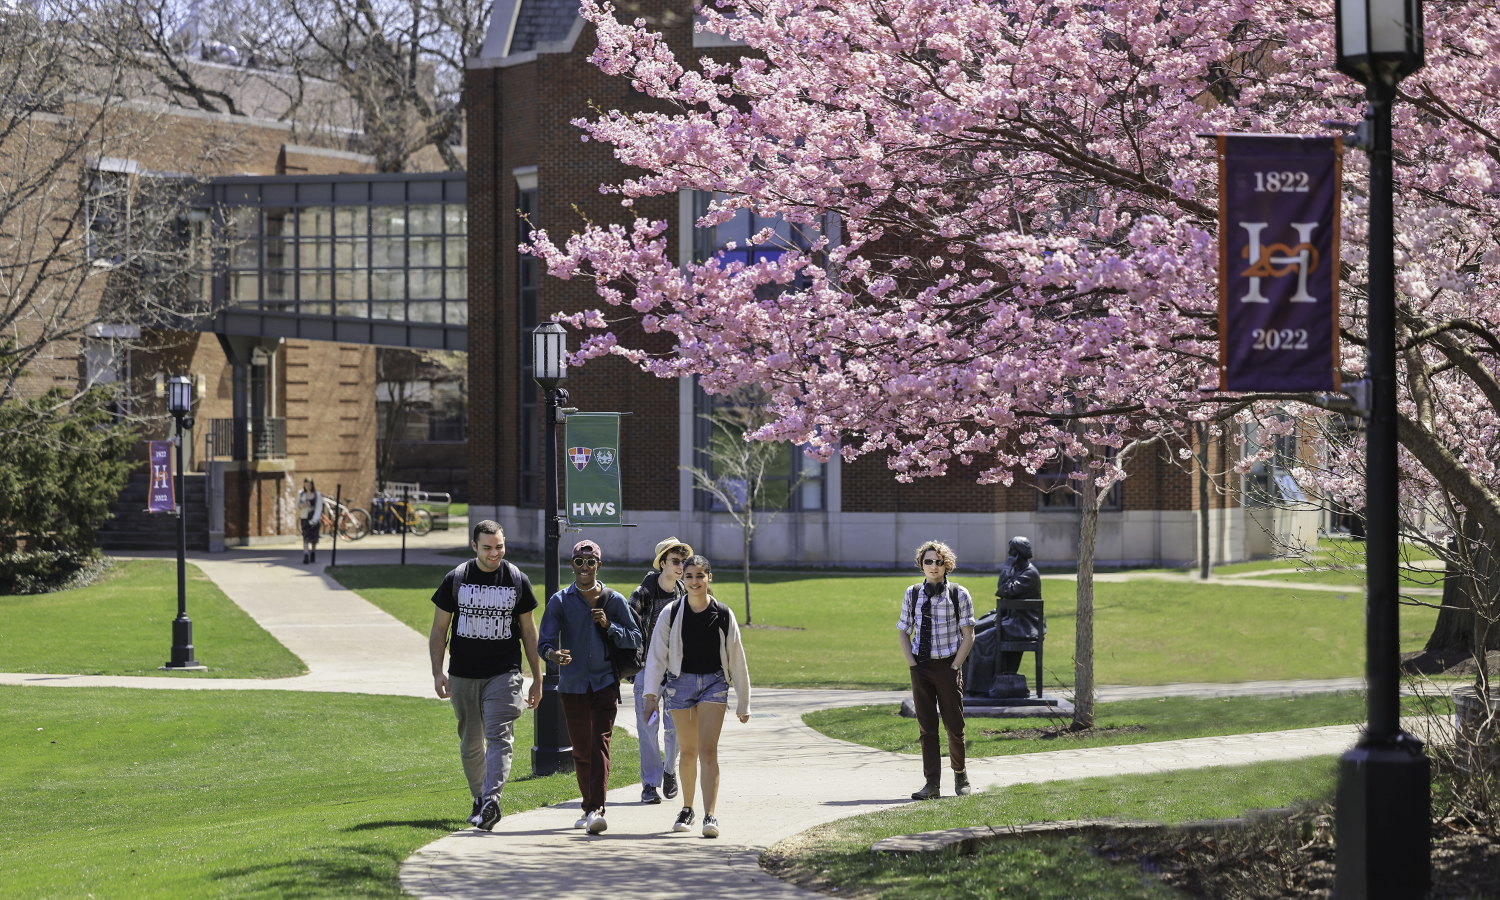 In This Week in Photos, we feature some of our favorite moments from the Spring Semester. Here, students catch up while walking to class.